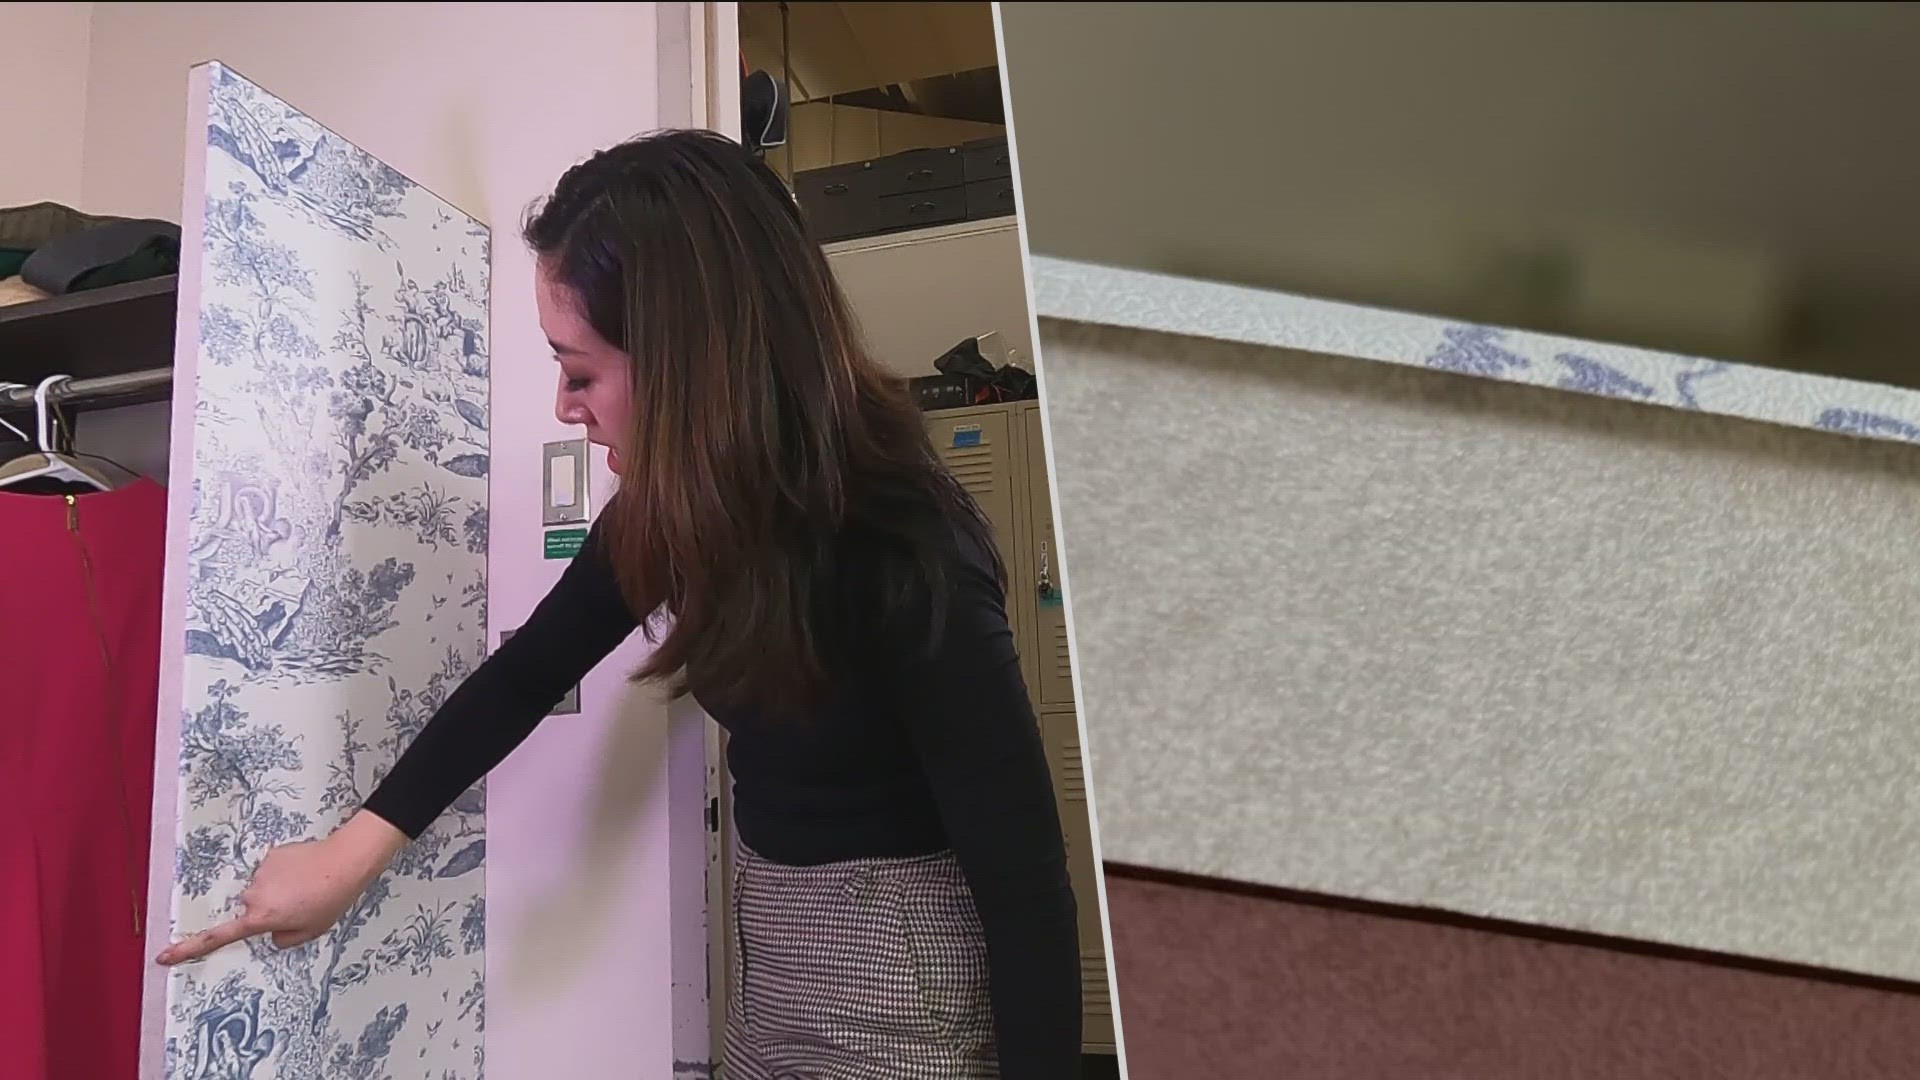 DIY home improvement hacks run rampant on social media. So we talked to an interior designer and tested out wallpaper that needs no paste.